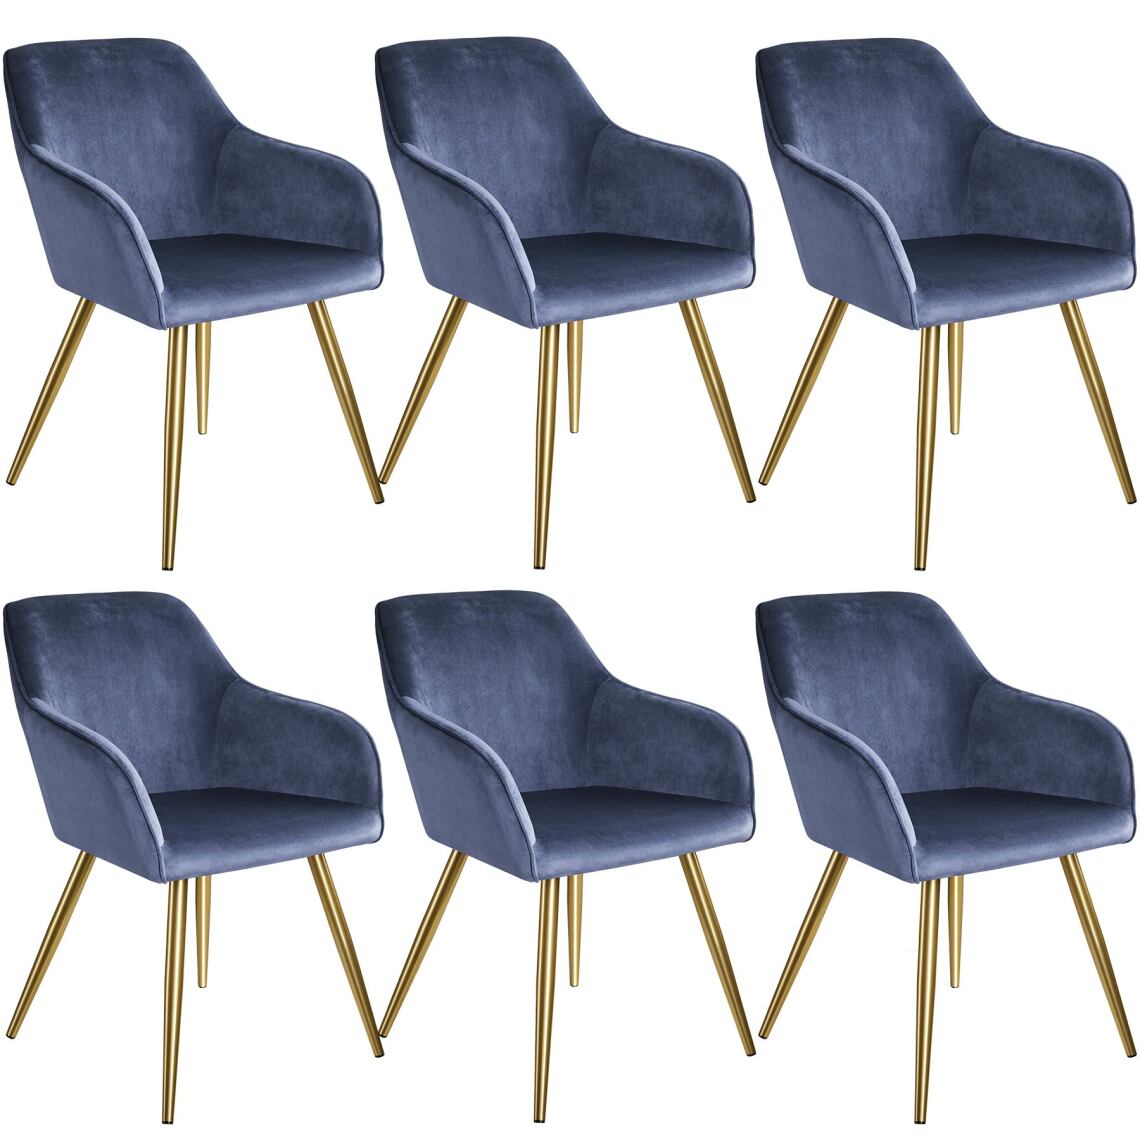 Tectake - 6 Chaises MARILYN Effet Velours Style Scandinave - bleu/or - Chaises